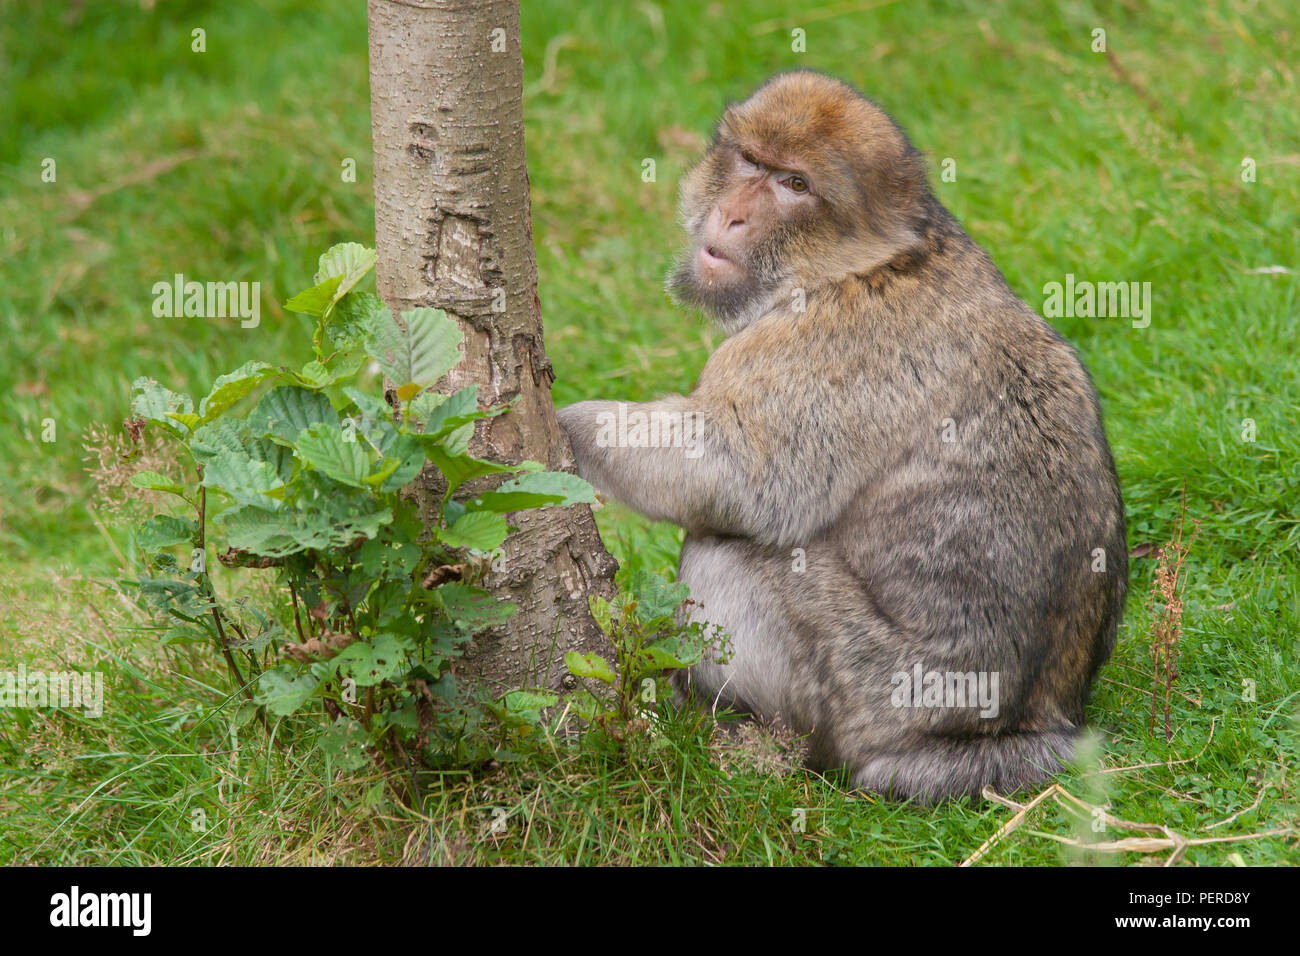 Barbary Maxaque at Trentham Monkey Forest in Stoke on Trent Stock Photo